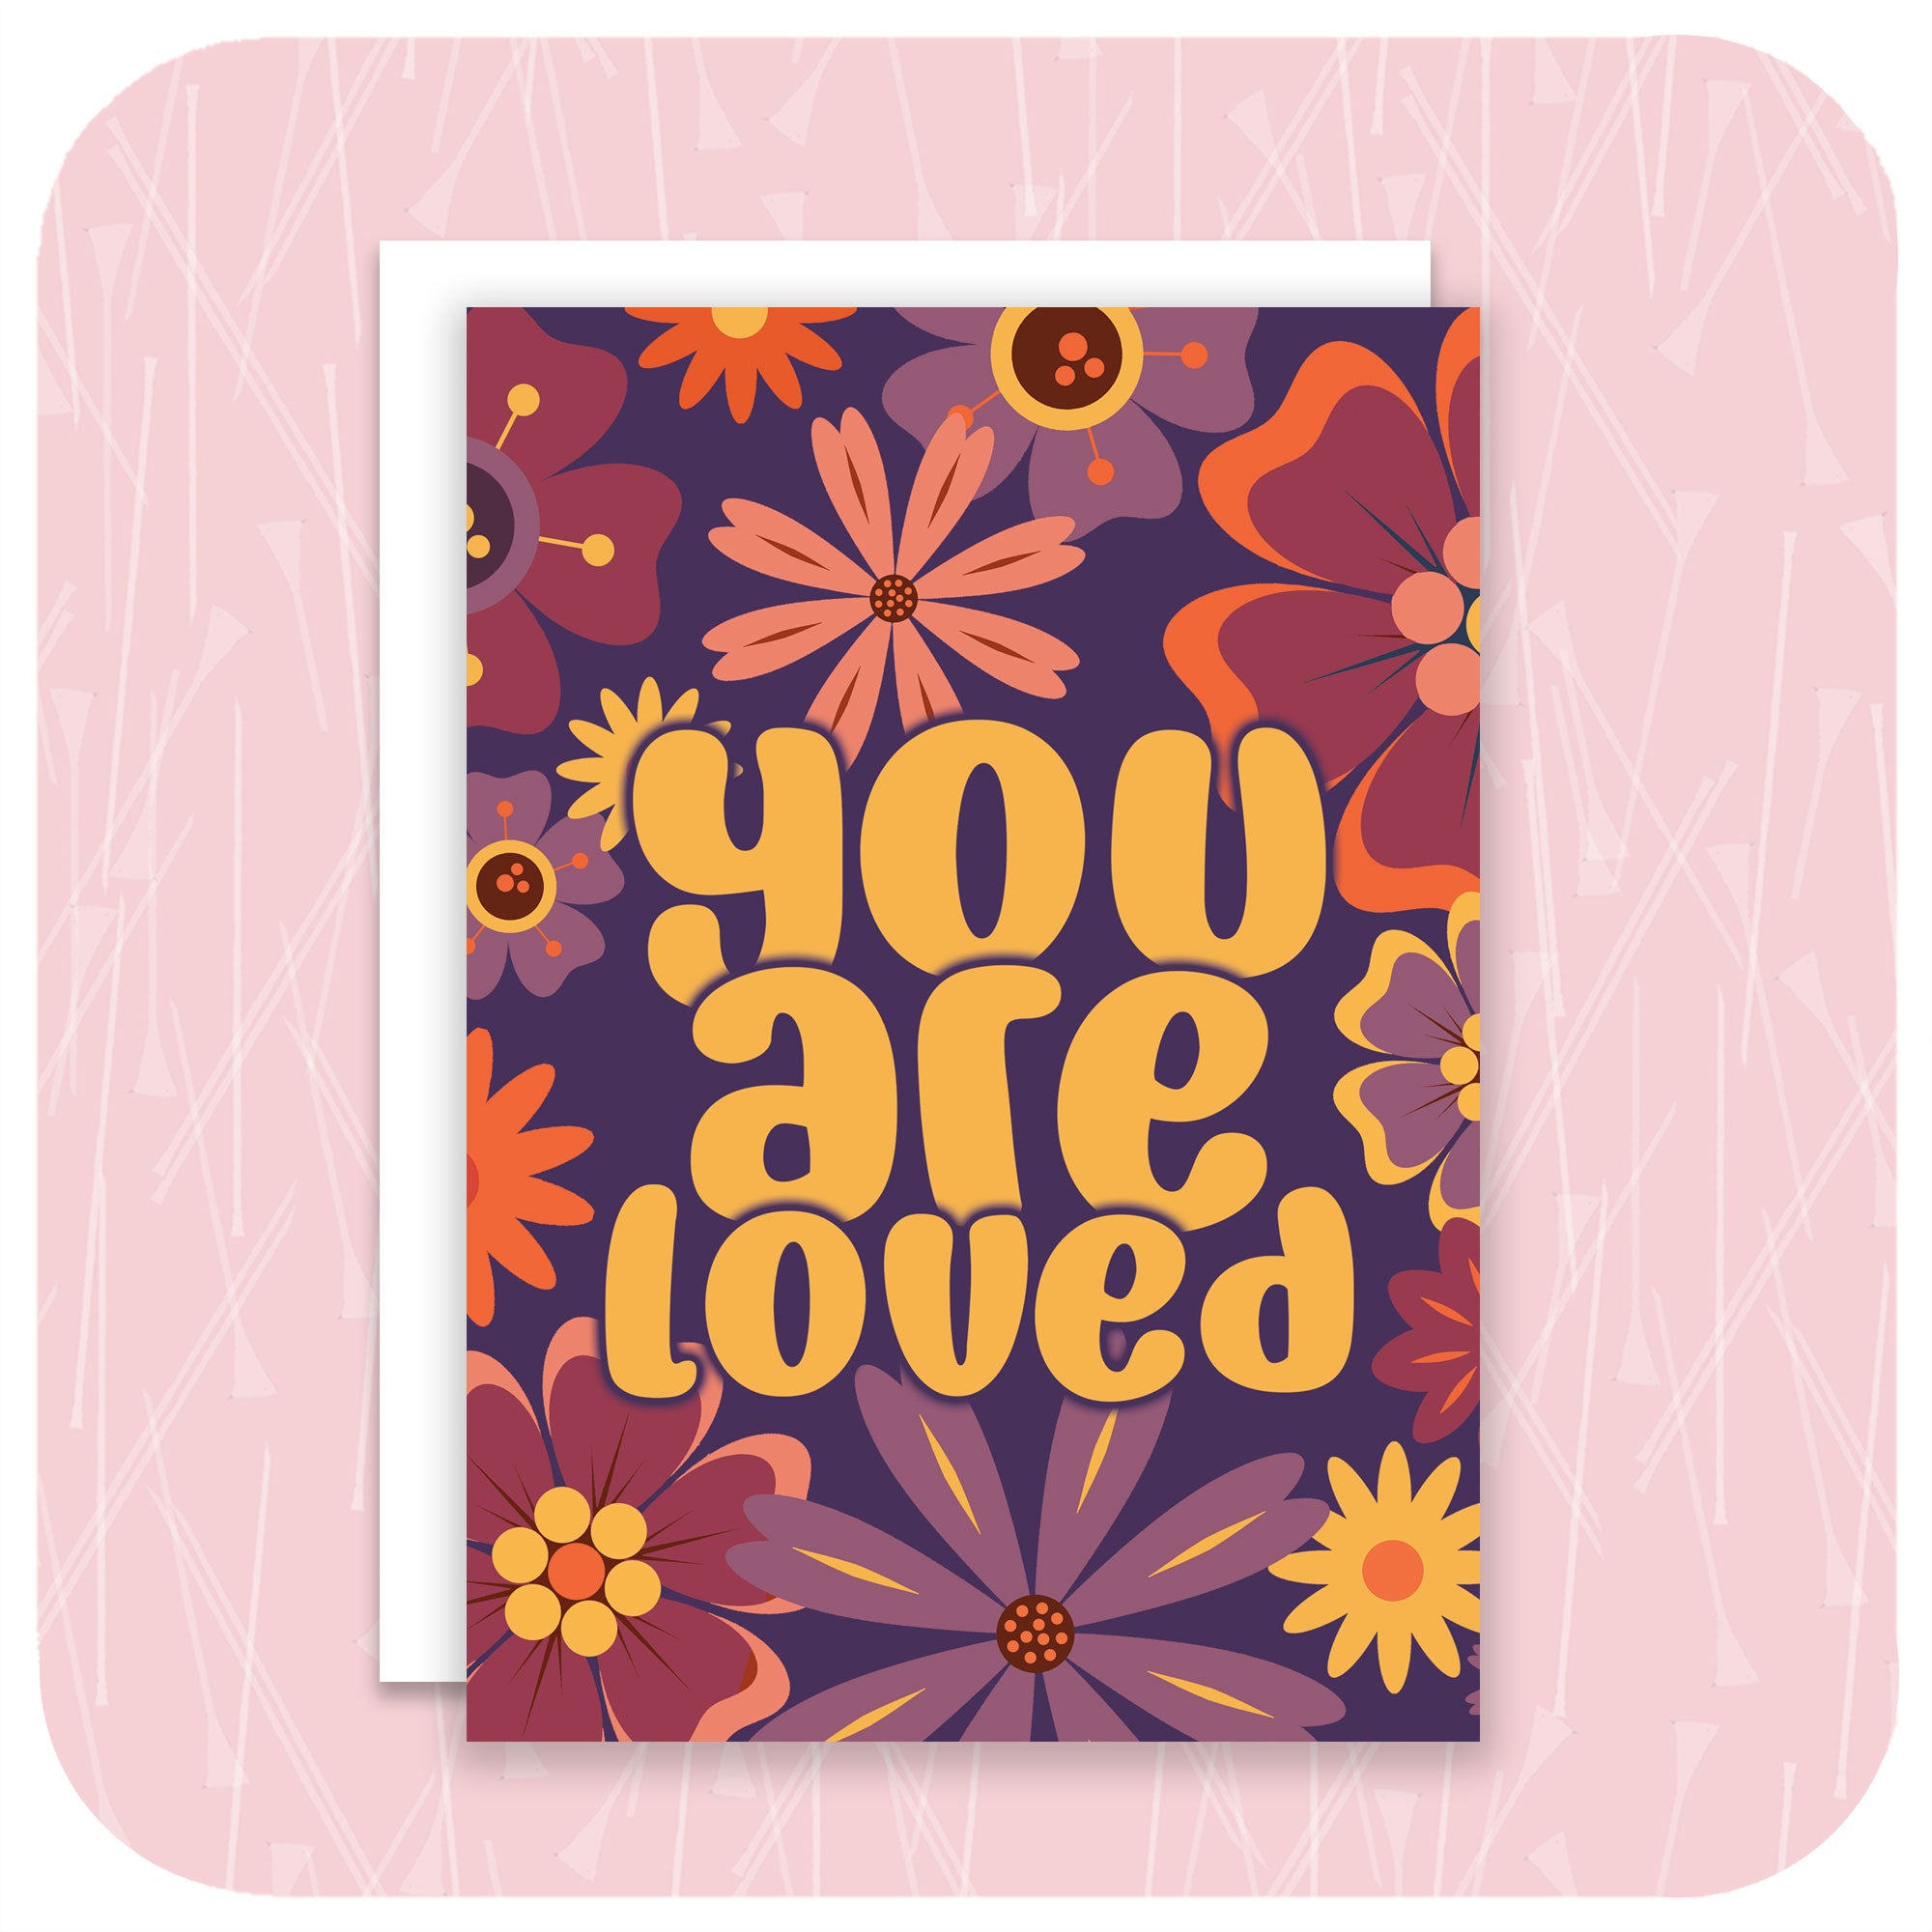 An A6 greetings card featuring 70s / 60s style flowers in pinks, purples & oranges and the words "You Are Loved" with a white envelope sits on a pale pink textured background | The Inkabilly Emporium